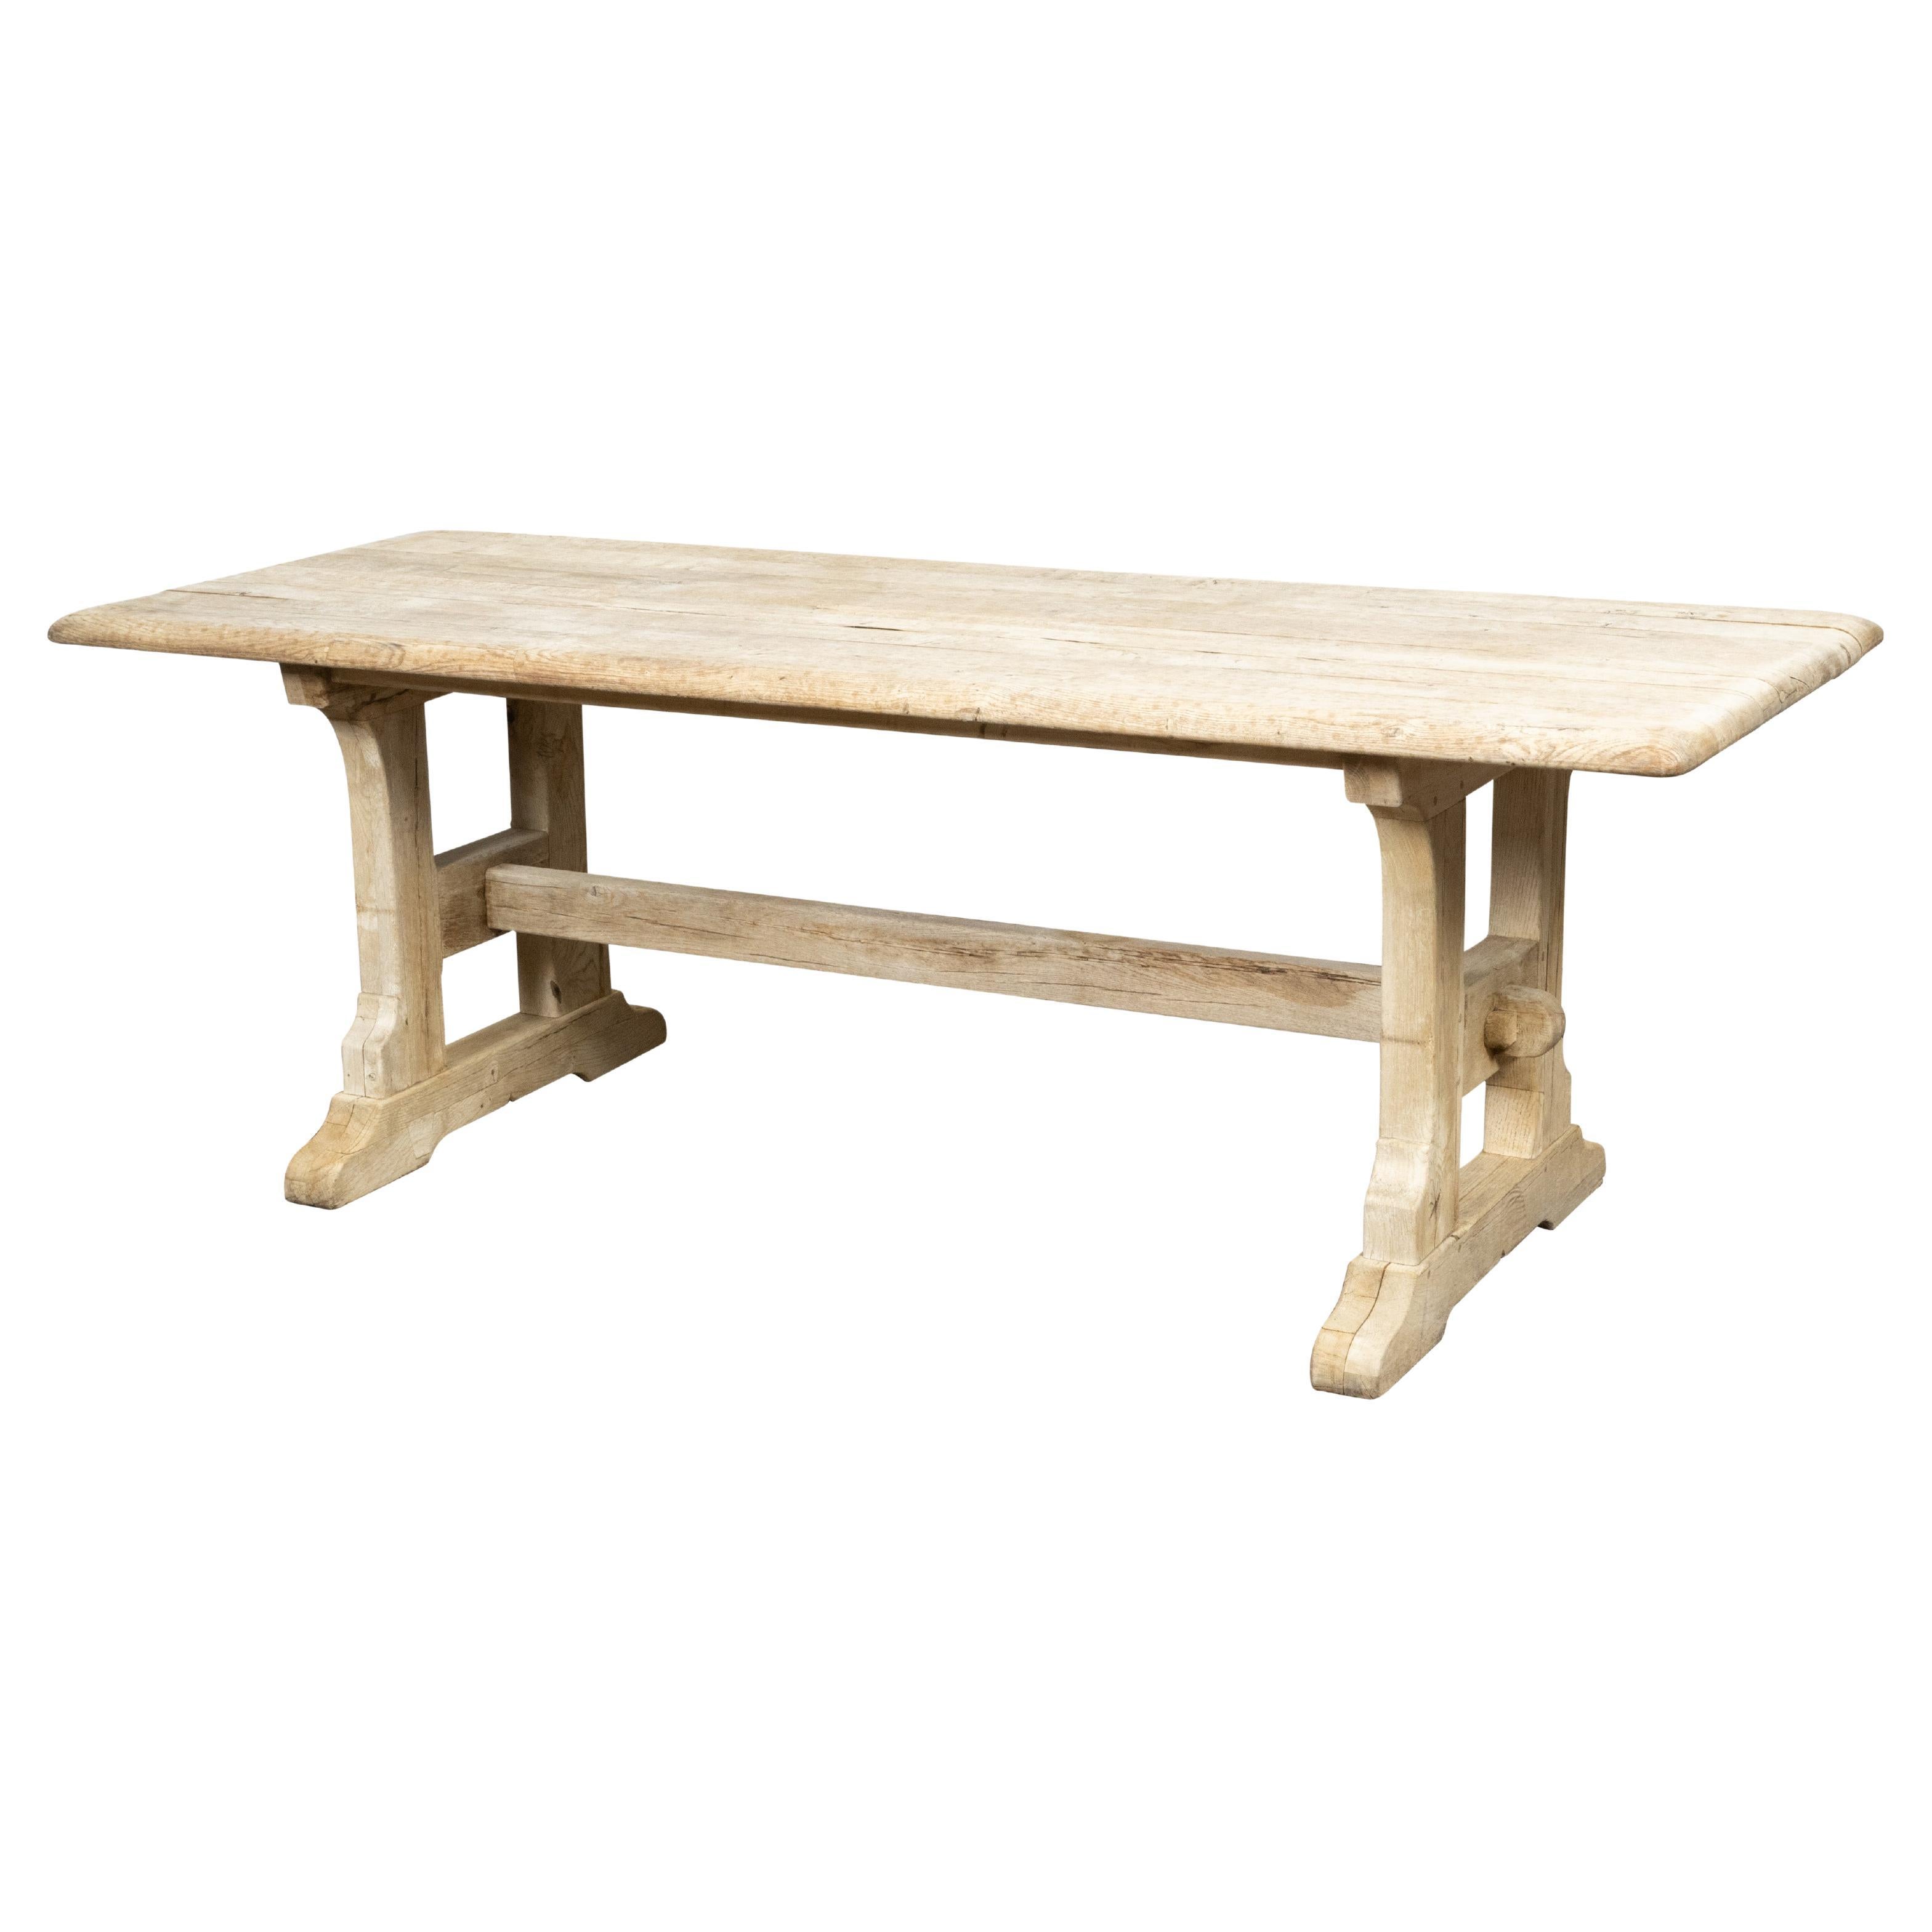 Rustic English 19th Century Natural Wood Farm Table with Trestle Base For Sale